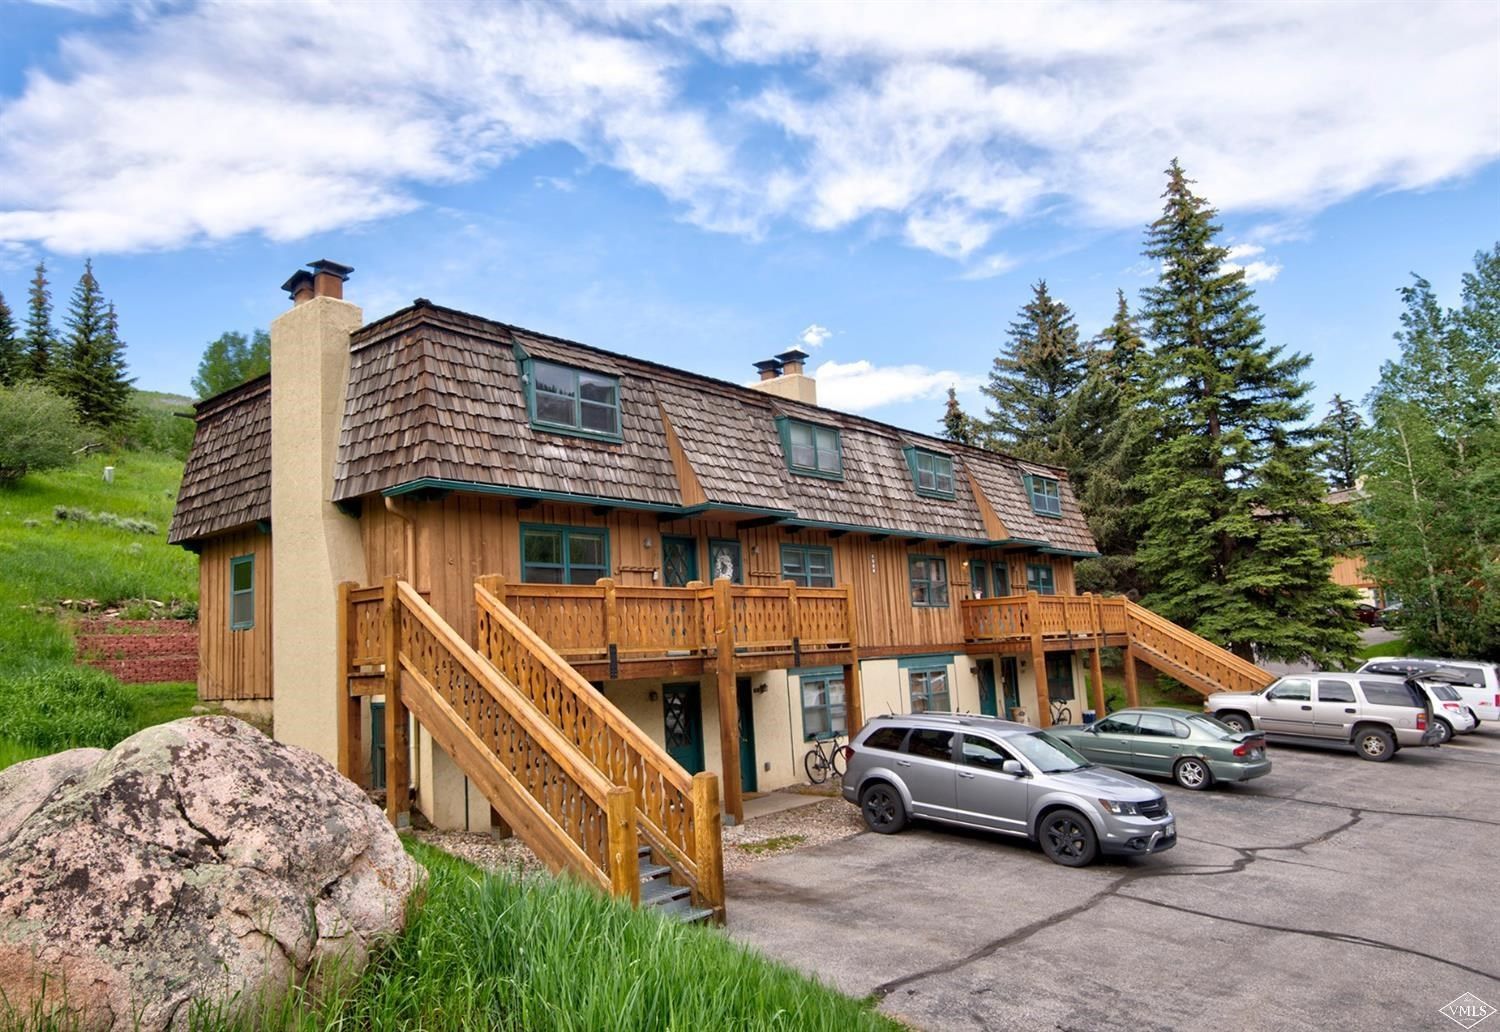 condos for sale in vail